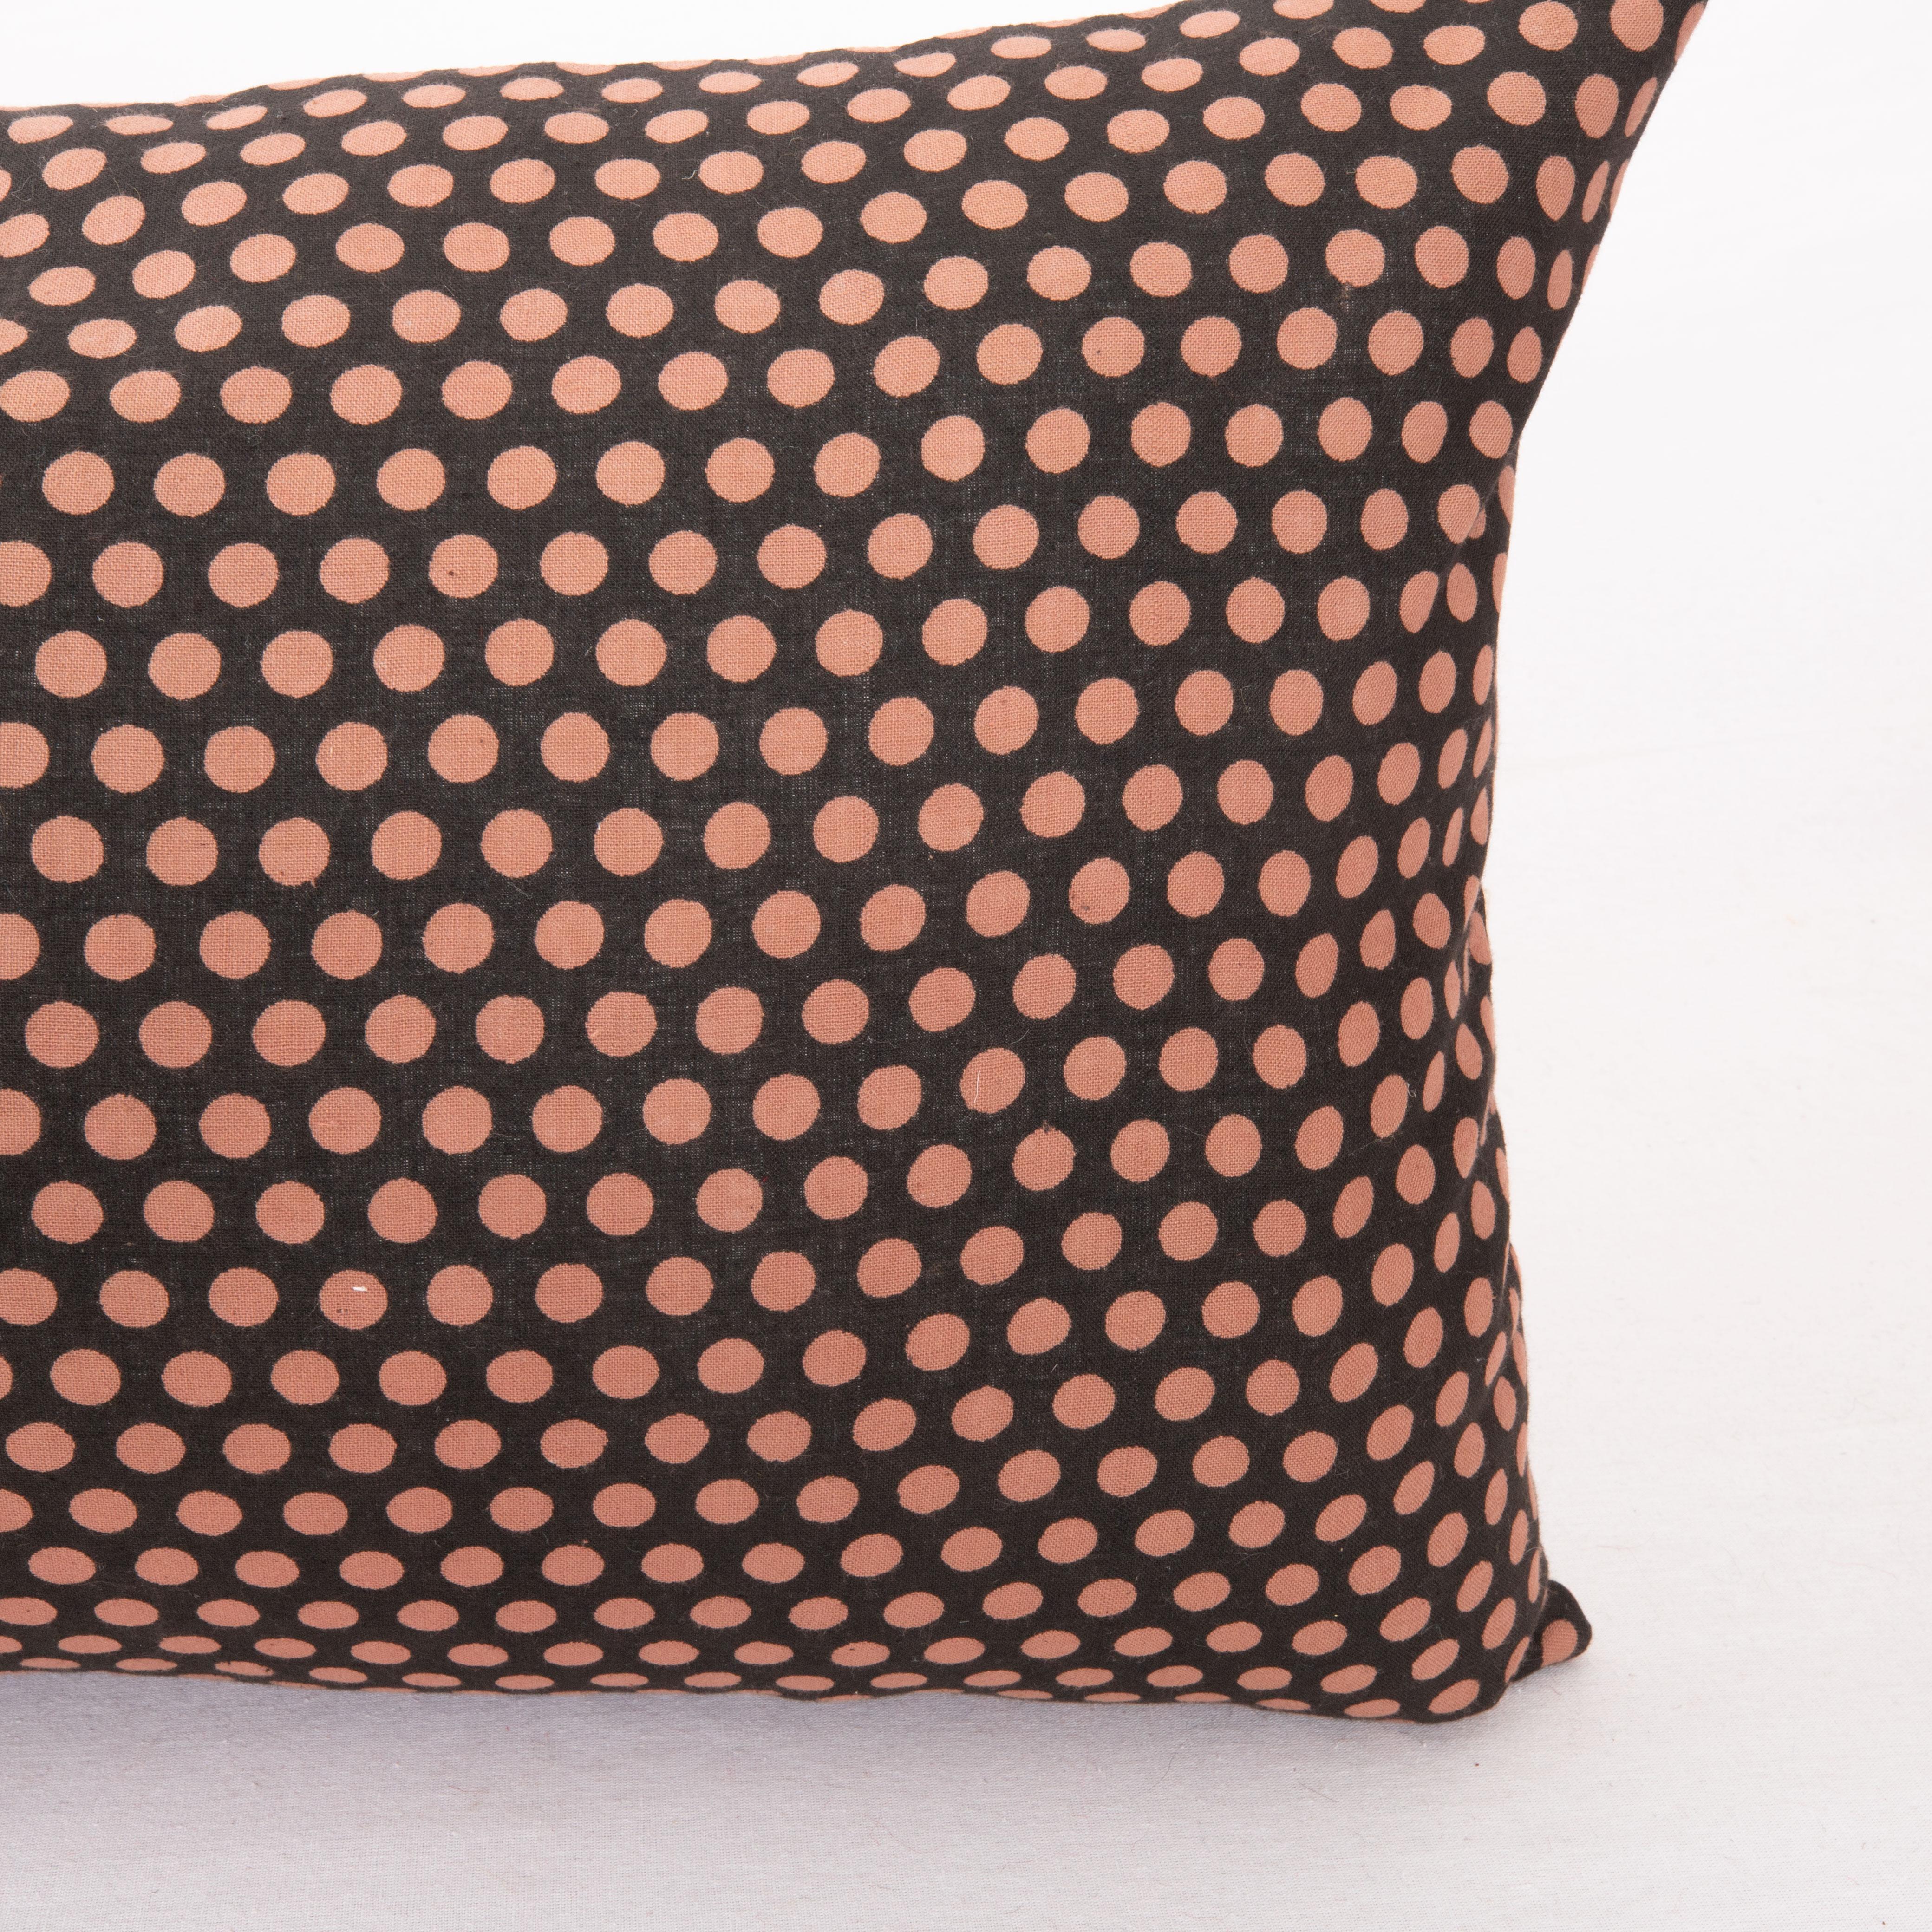 Kalamkari Pillow Cover Made from a Vintage Turkish Block Printed Panel For Sale